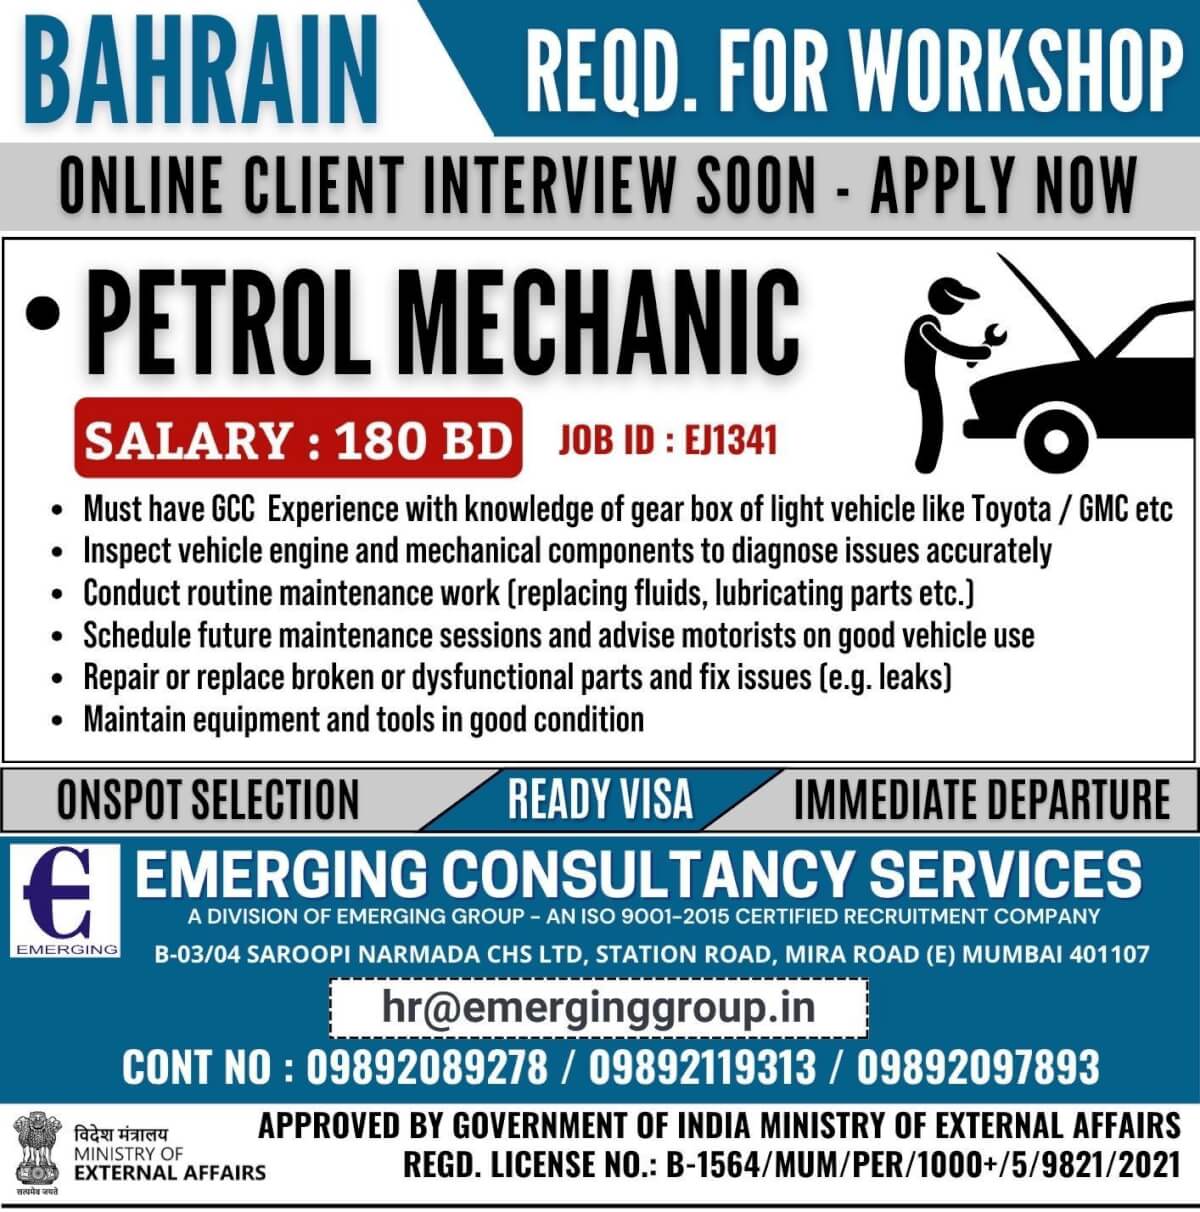 ONLINE CLIENT INTERVIEW SOON - APPLY NOW - REQD. FOR WORKSHOP IN BAHRAIN